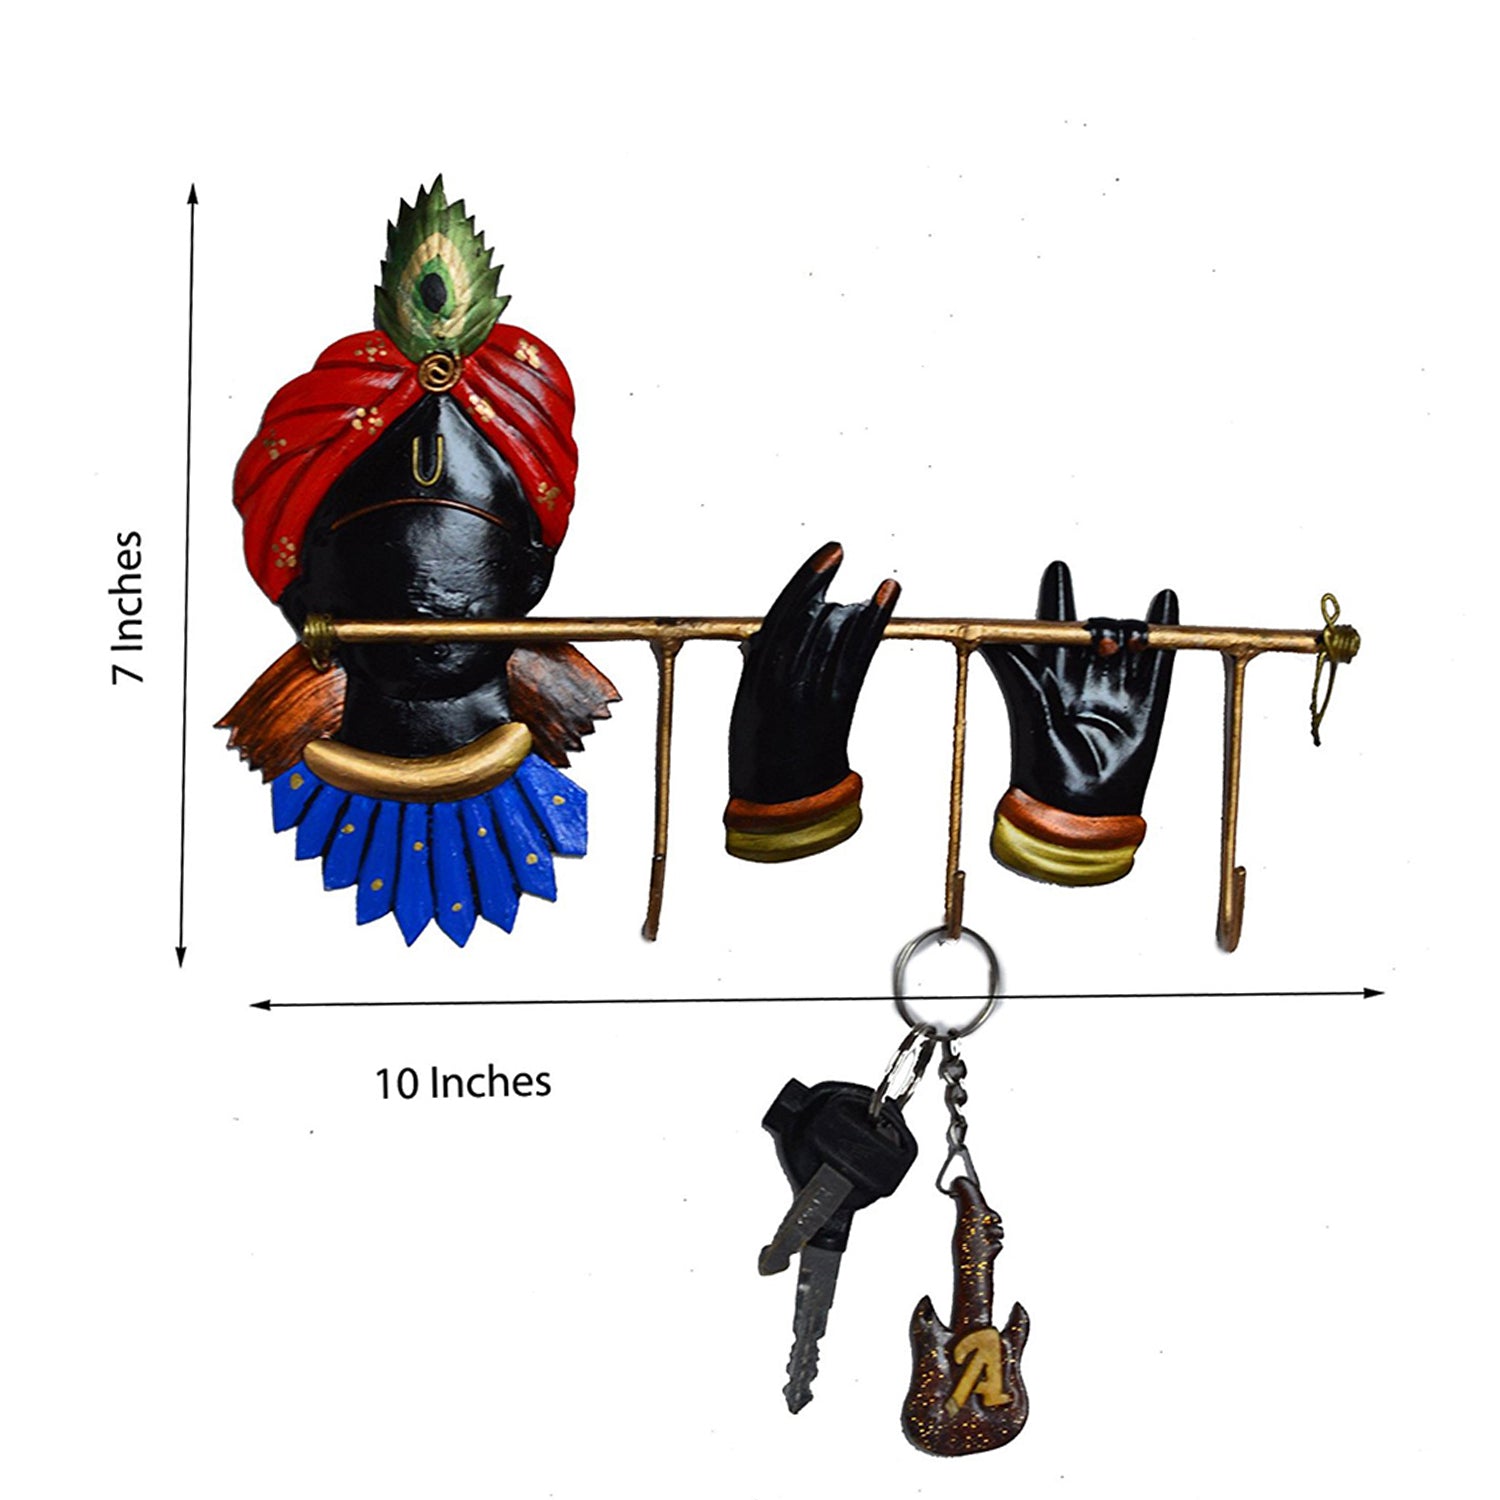 Wrought Iron Lord Krishna Playing Flute Key Holder (Red, Blue, Green and Black) 2